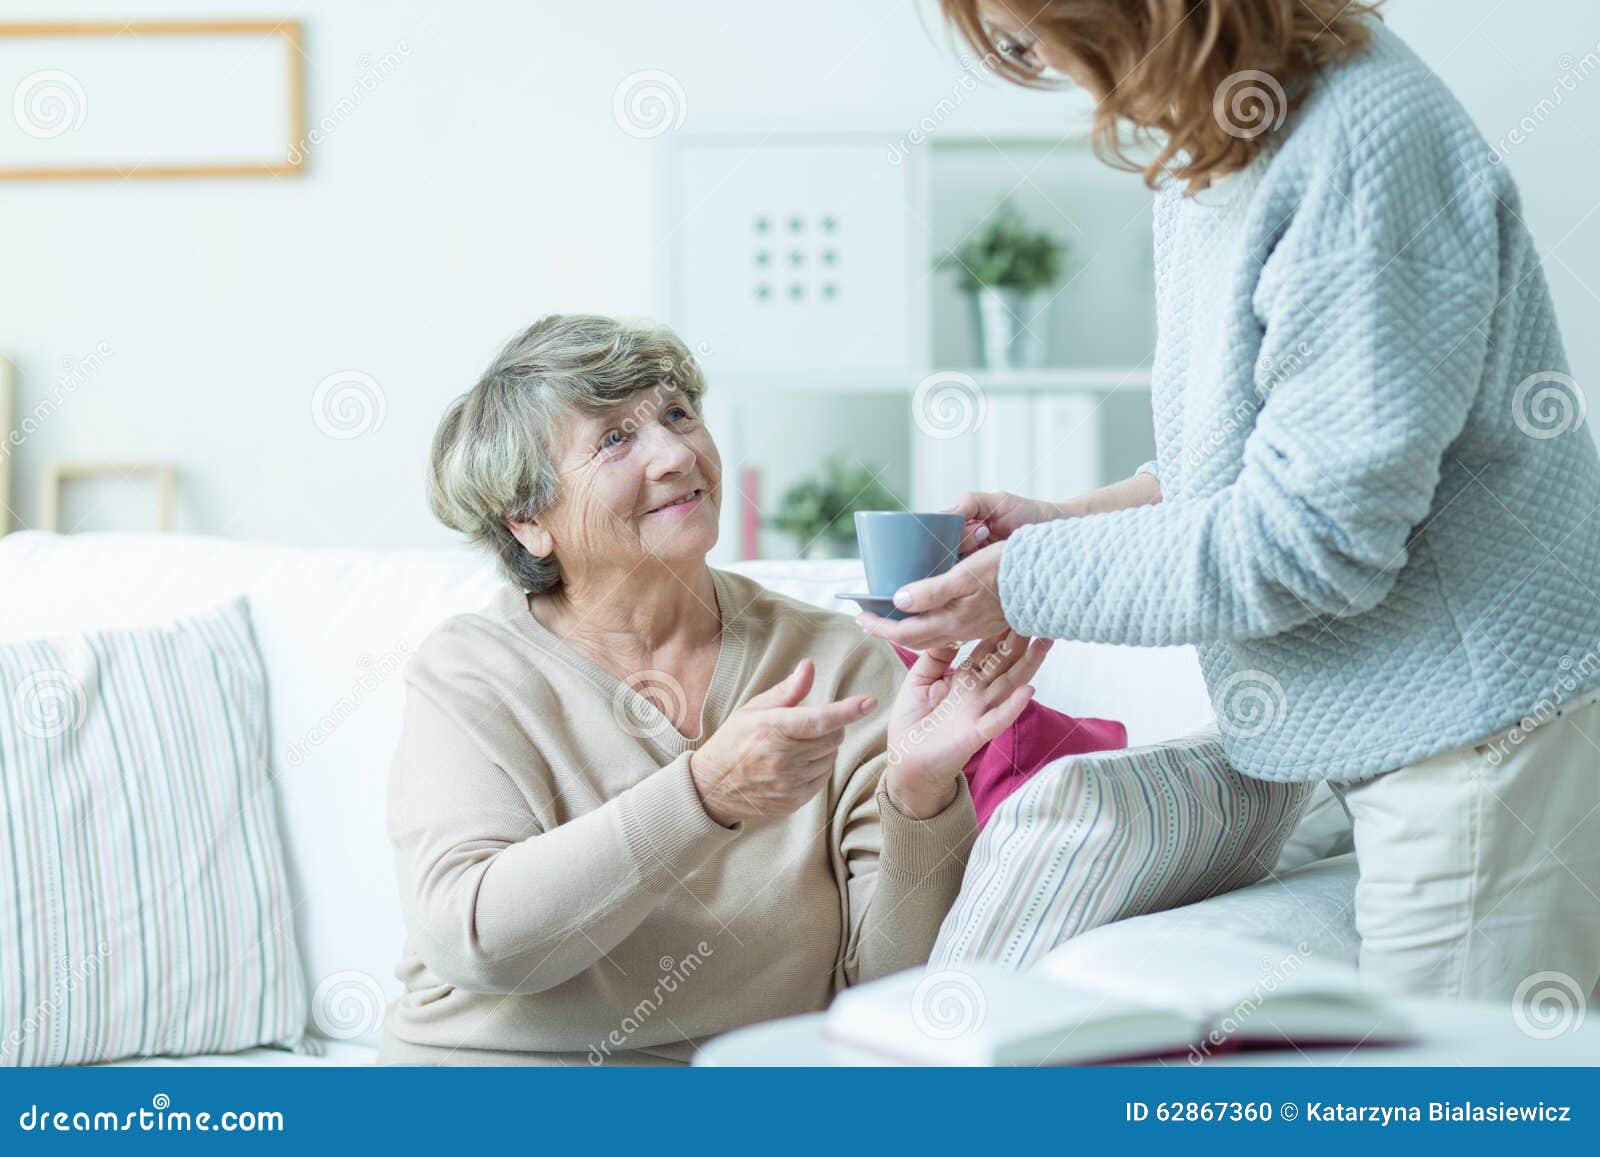 daughter caring about elder mother